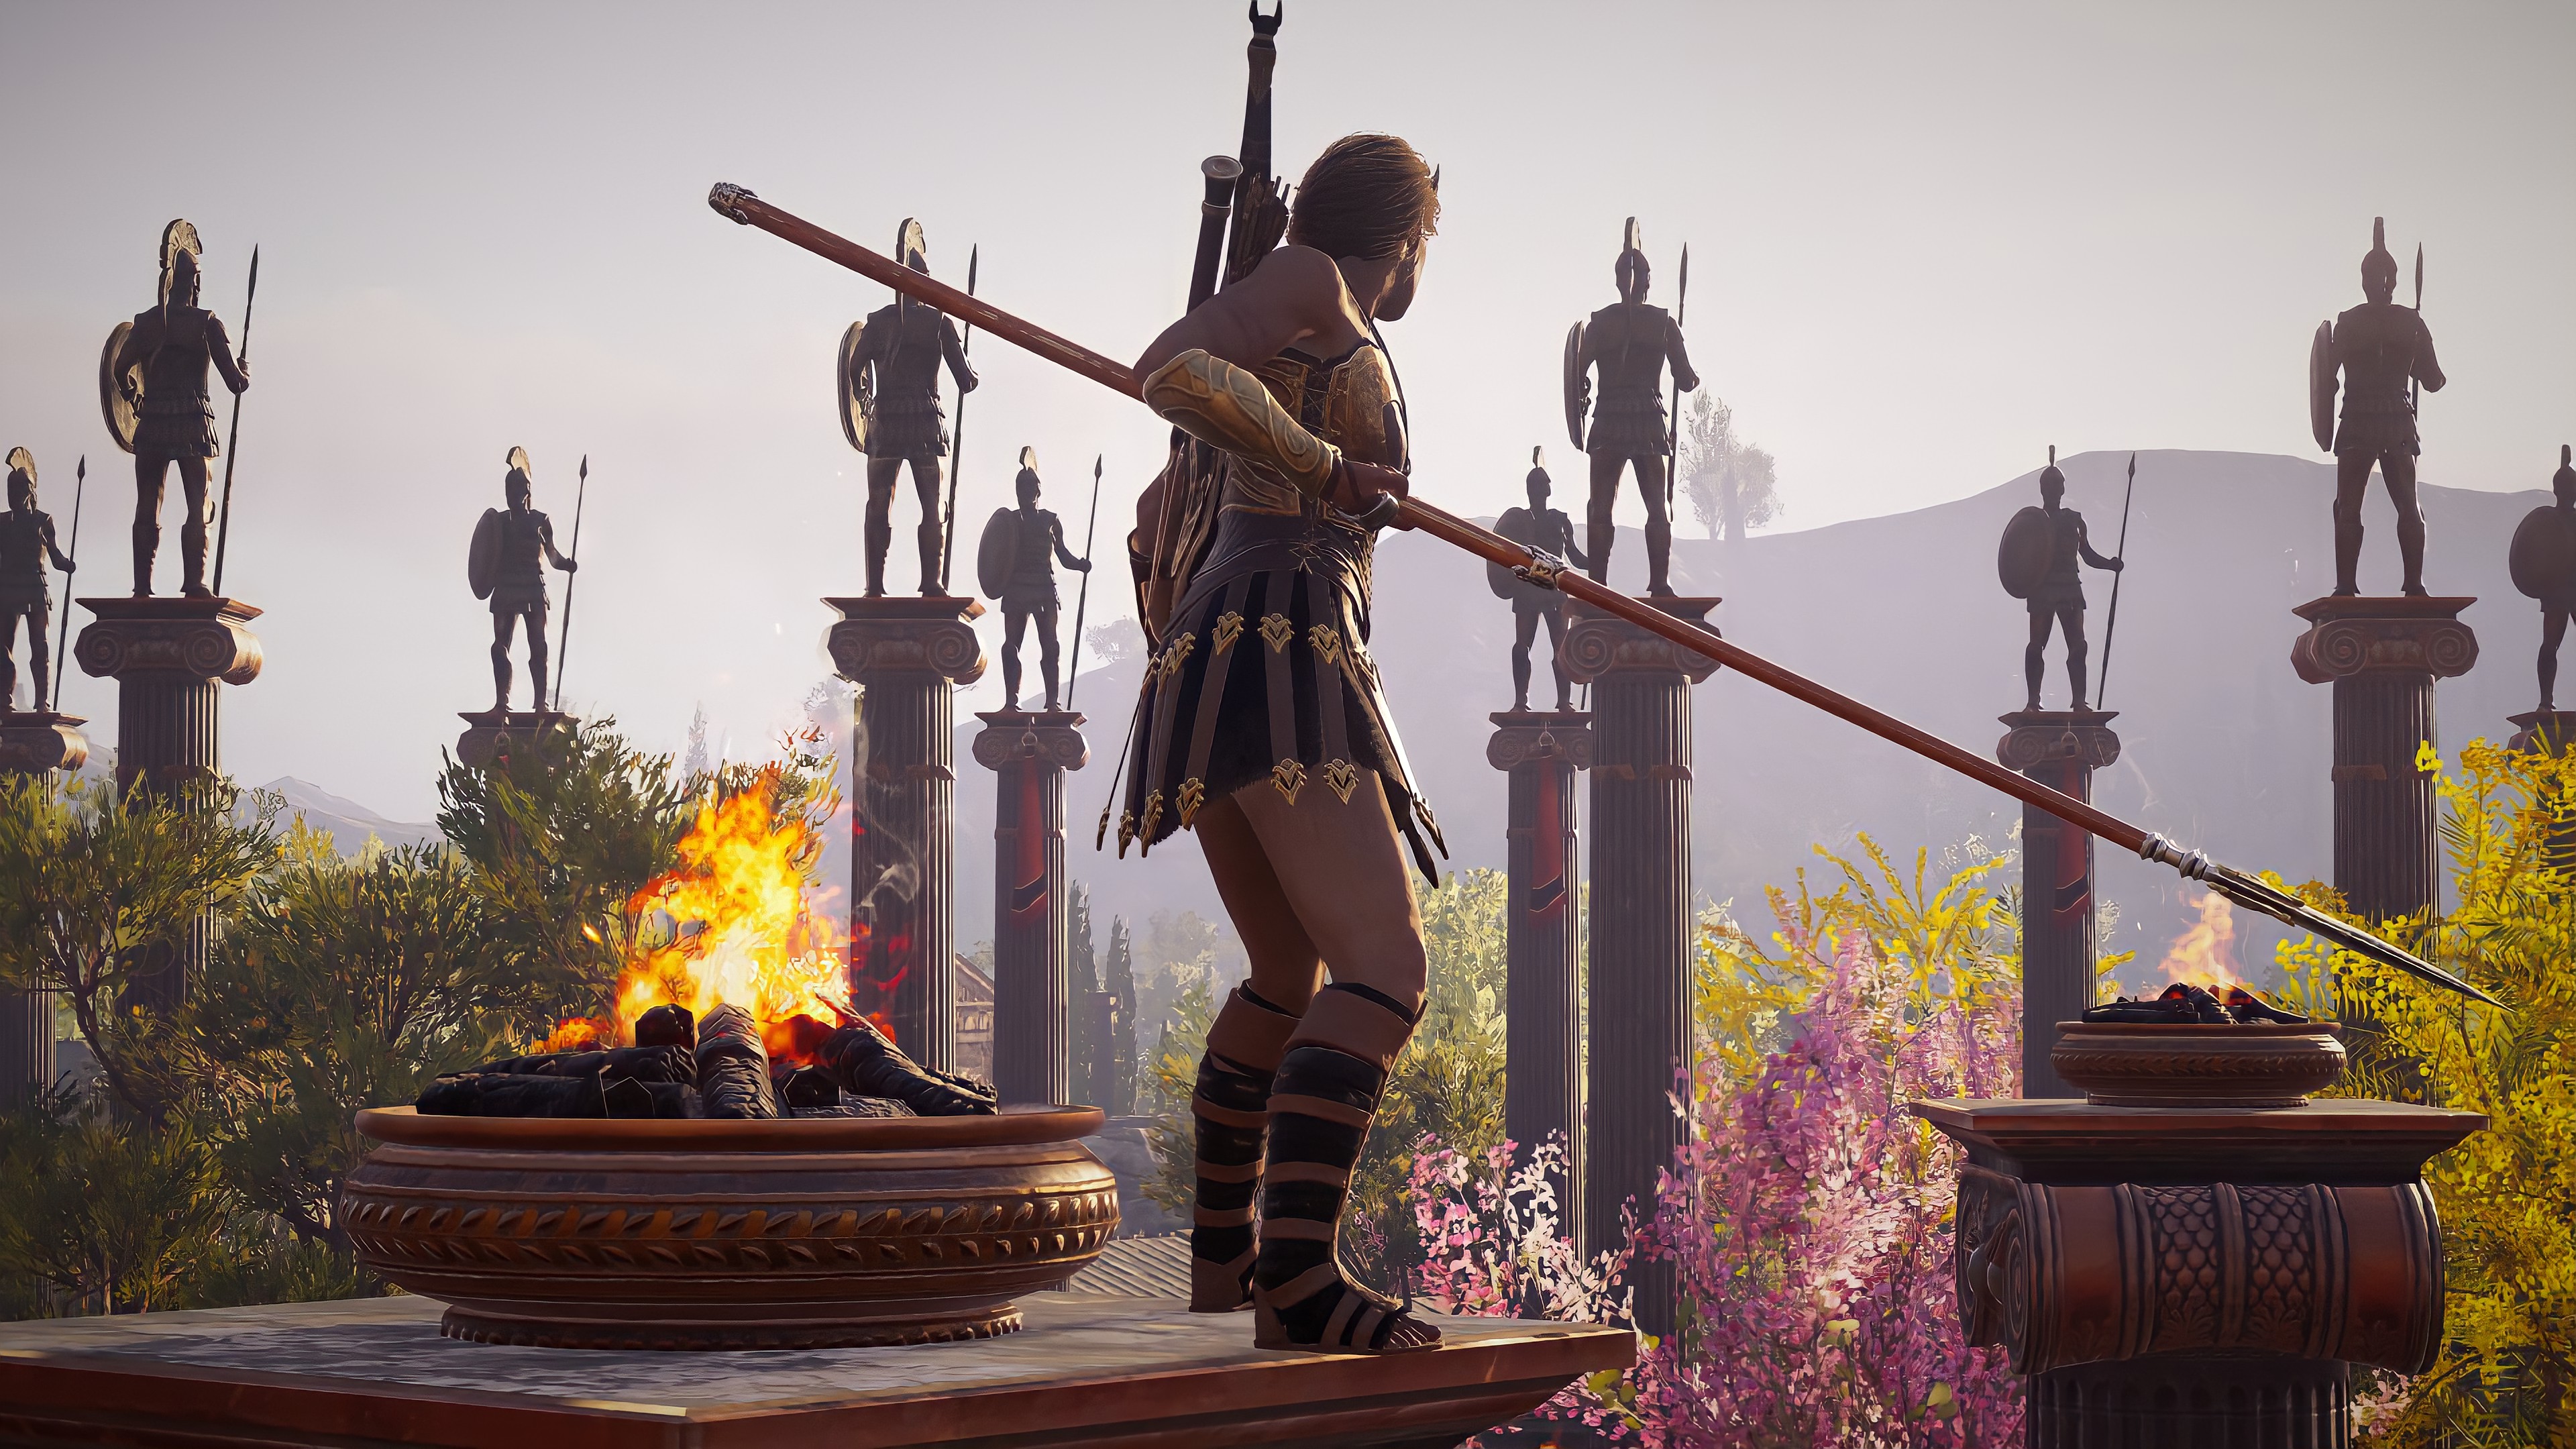 General 3840x2160 Ubisoft Kassandra video games screen shot Assassin's Creed Assassin's Creed: Odyssey video game characters